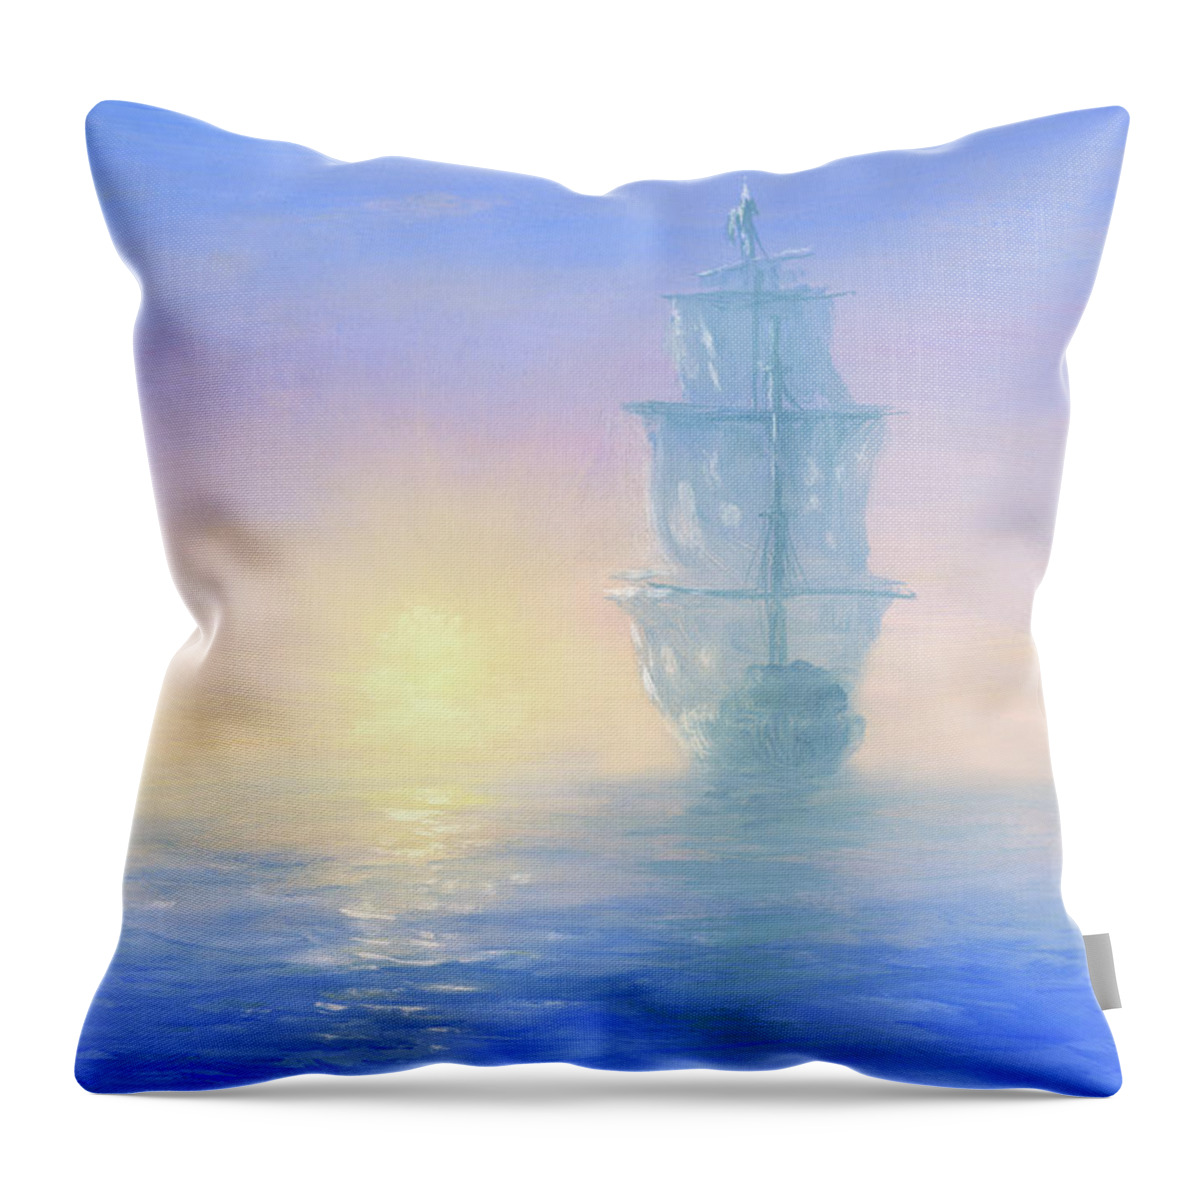 Art Throw Pillow featuring the digital art Ghost Ship by Pobytov